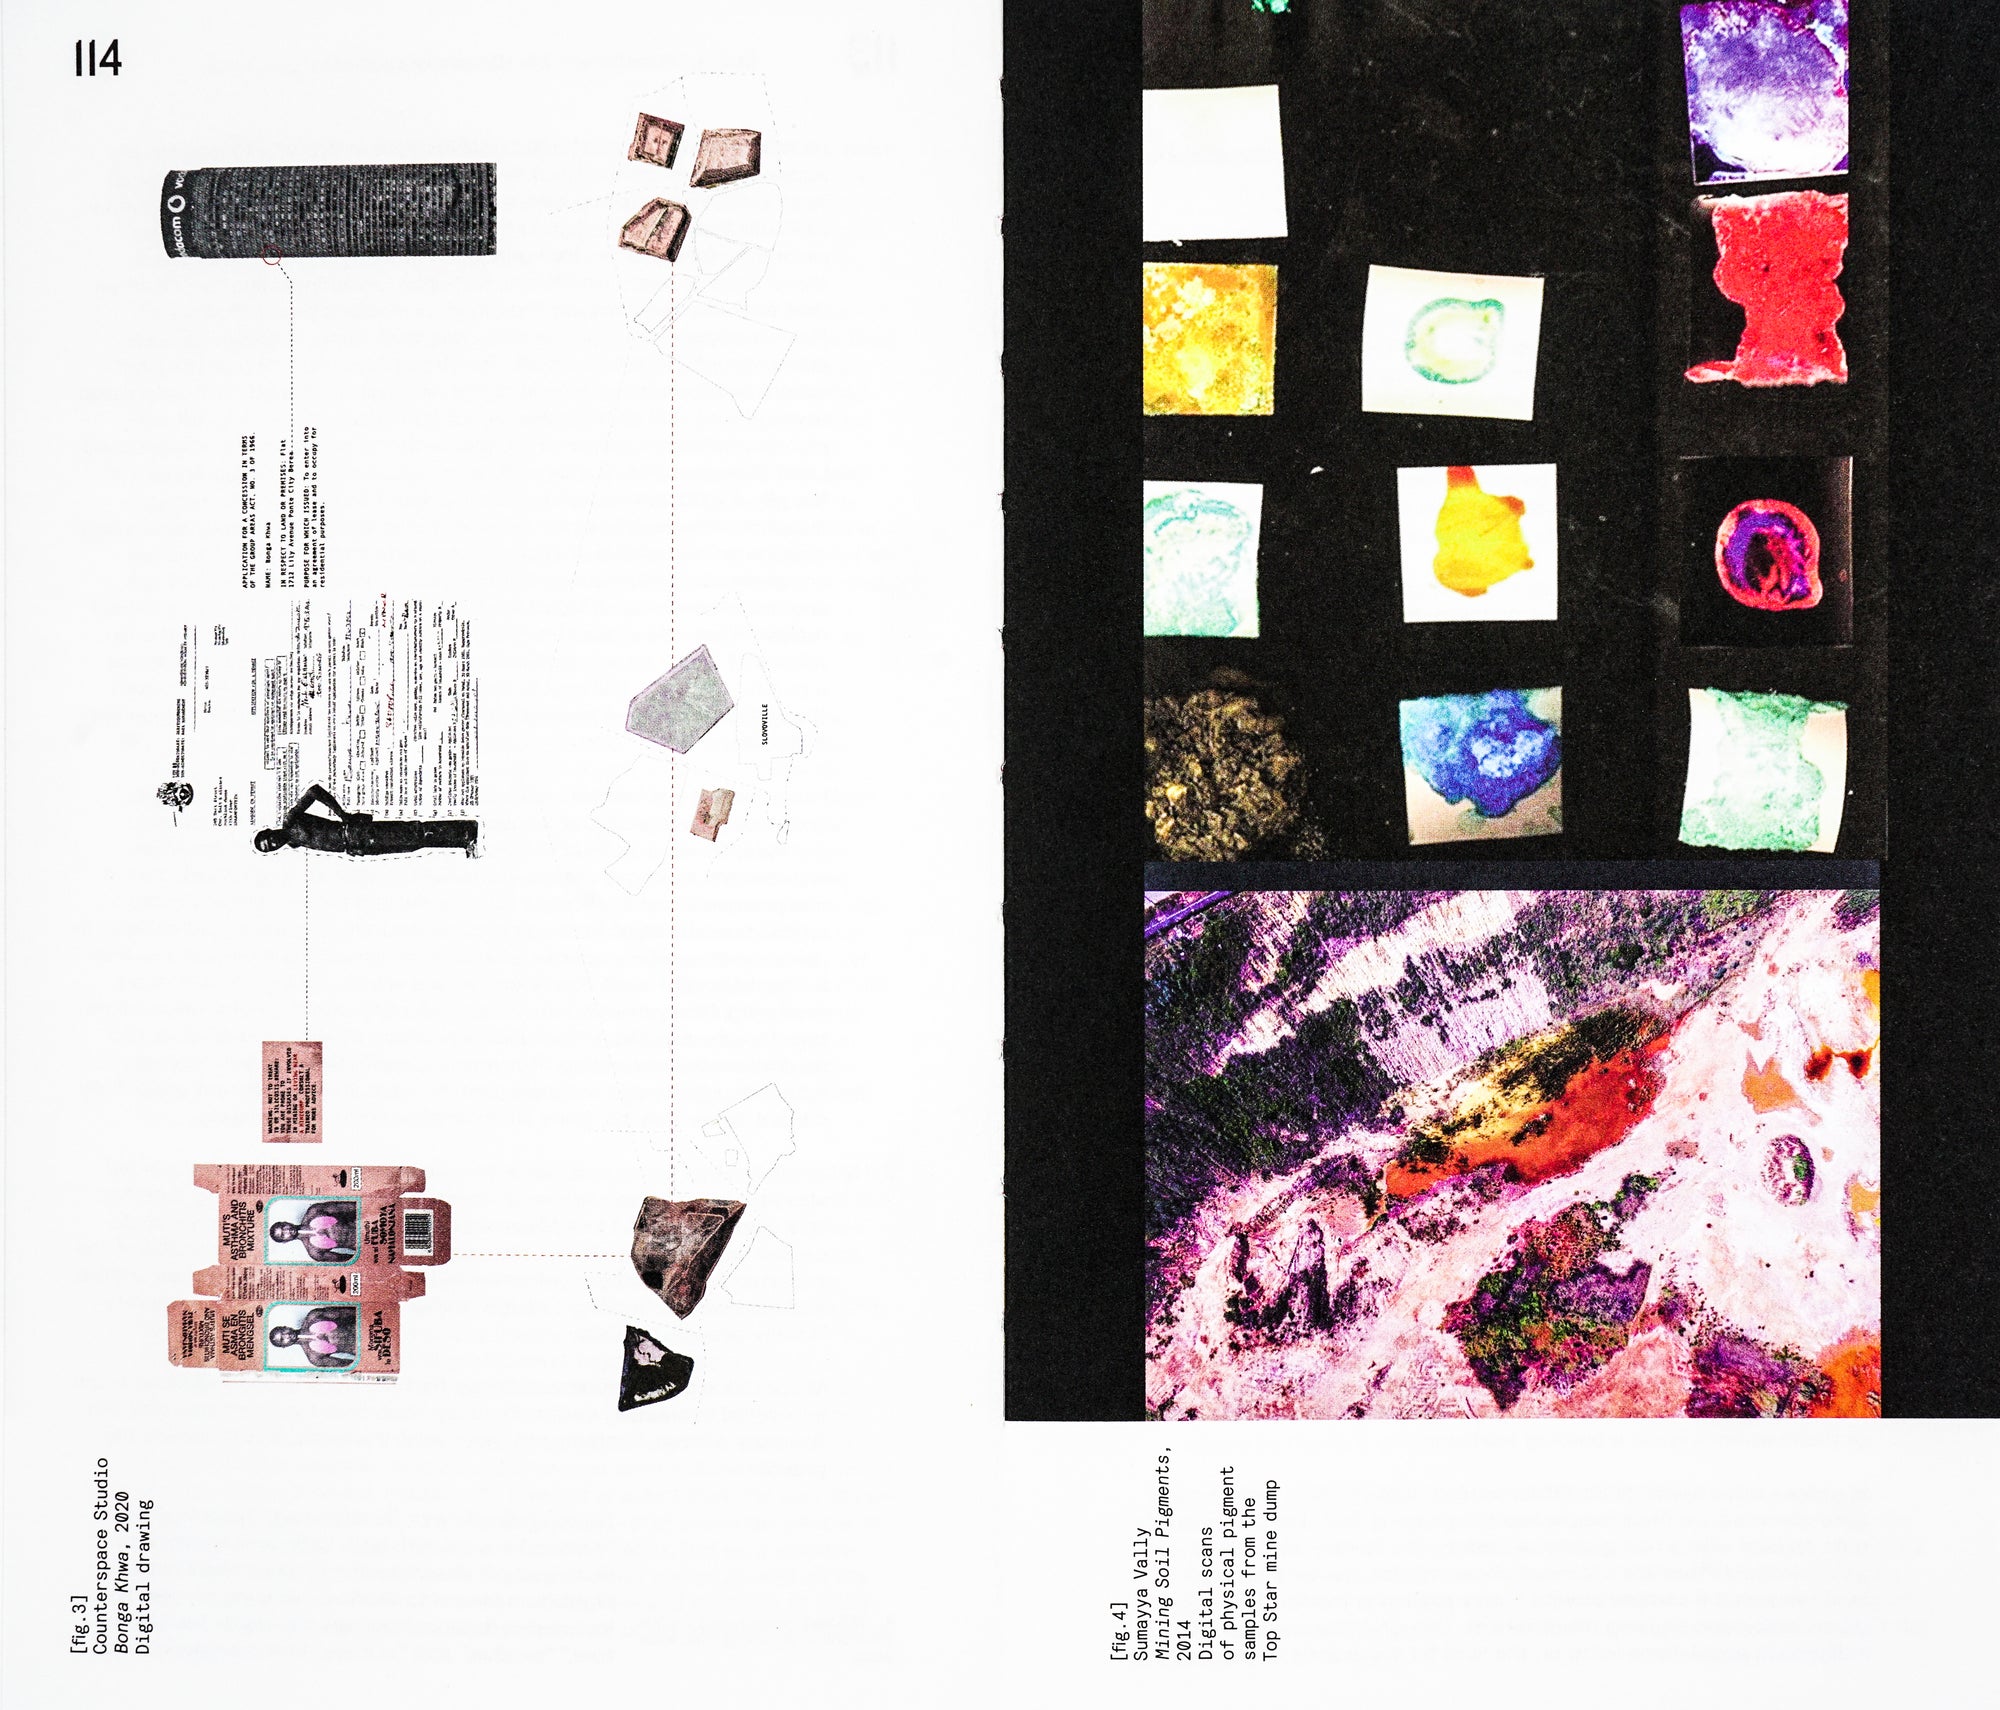 Book spread with white left page with interspersed elements of images and text. The right page has a dark background and small colourful abstract images scattered all over it. 